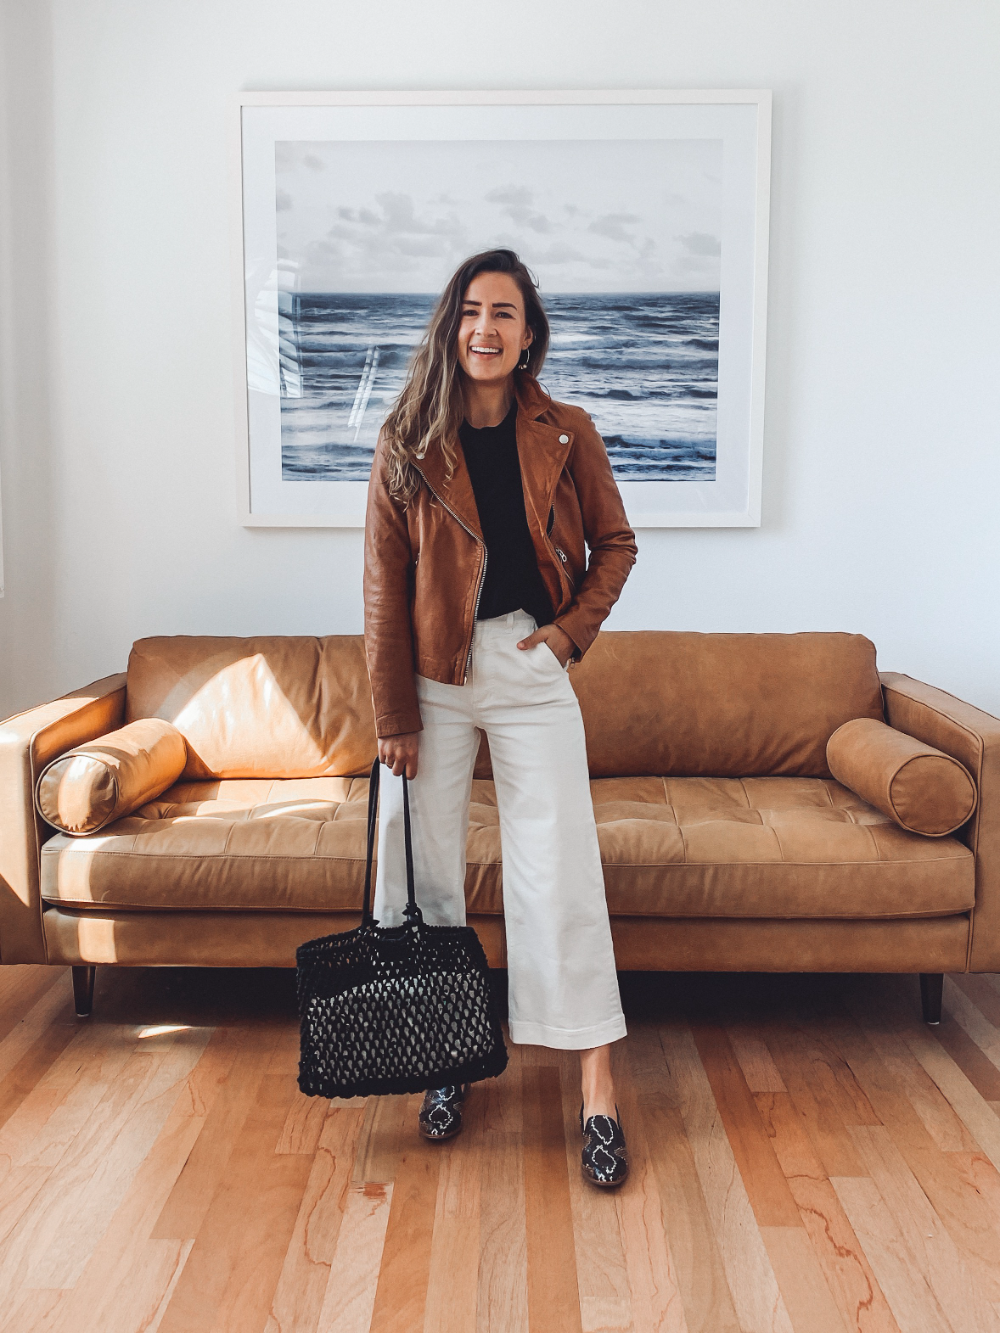 How to Wear Tan Leather Jacket: 15 Stylish Outfit Ideas for Women